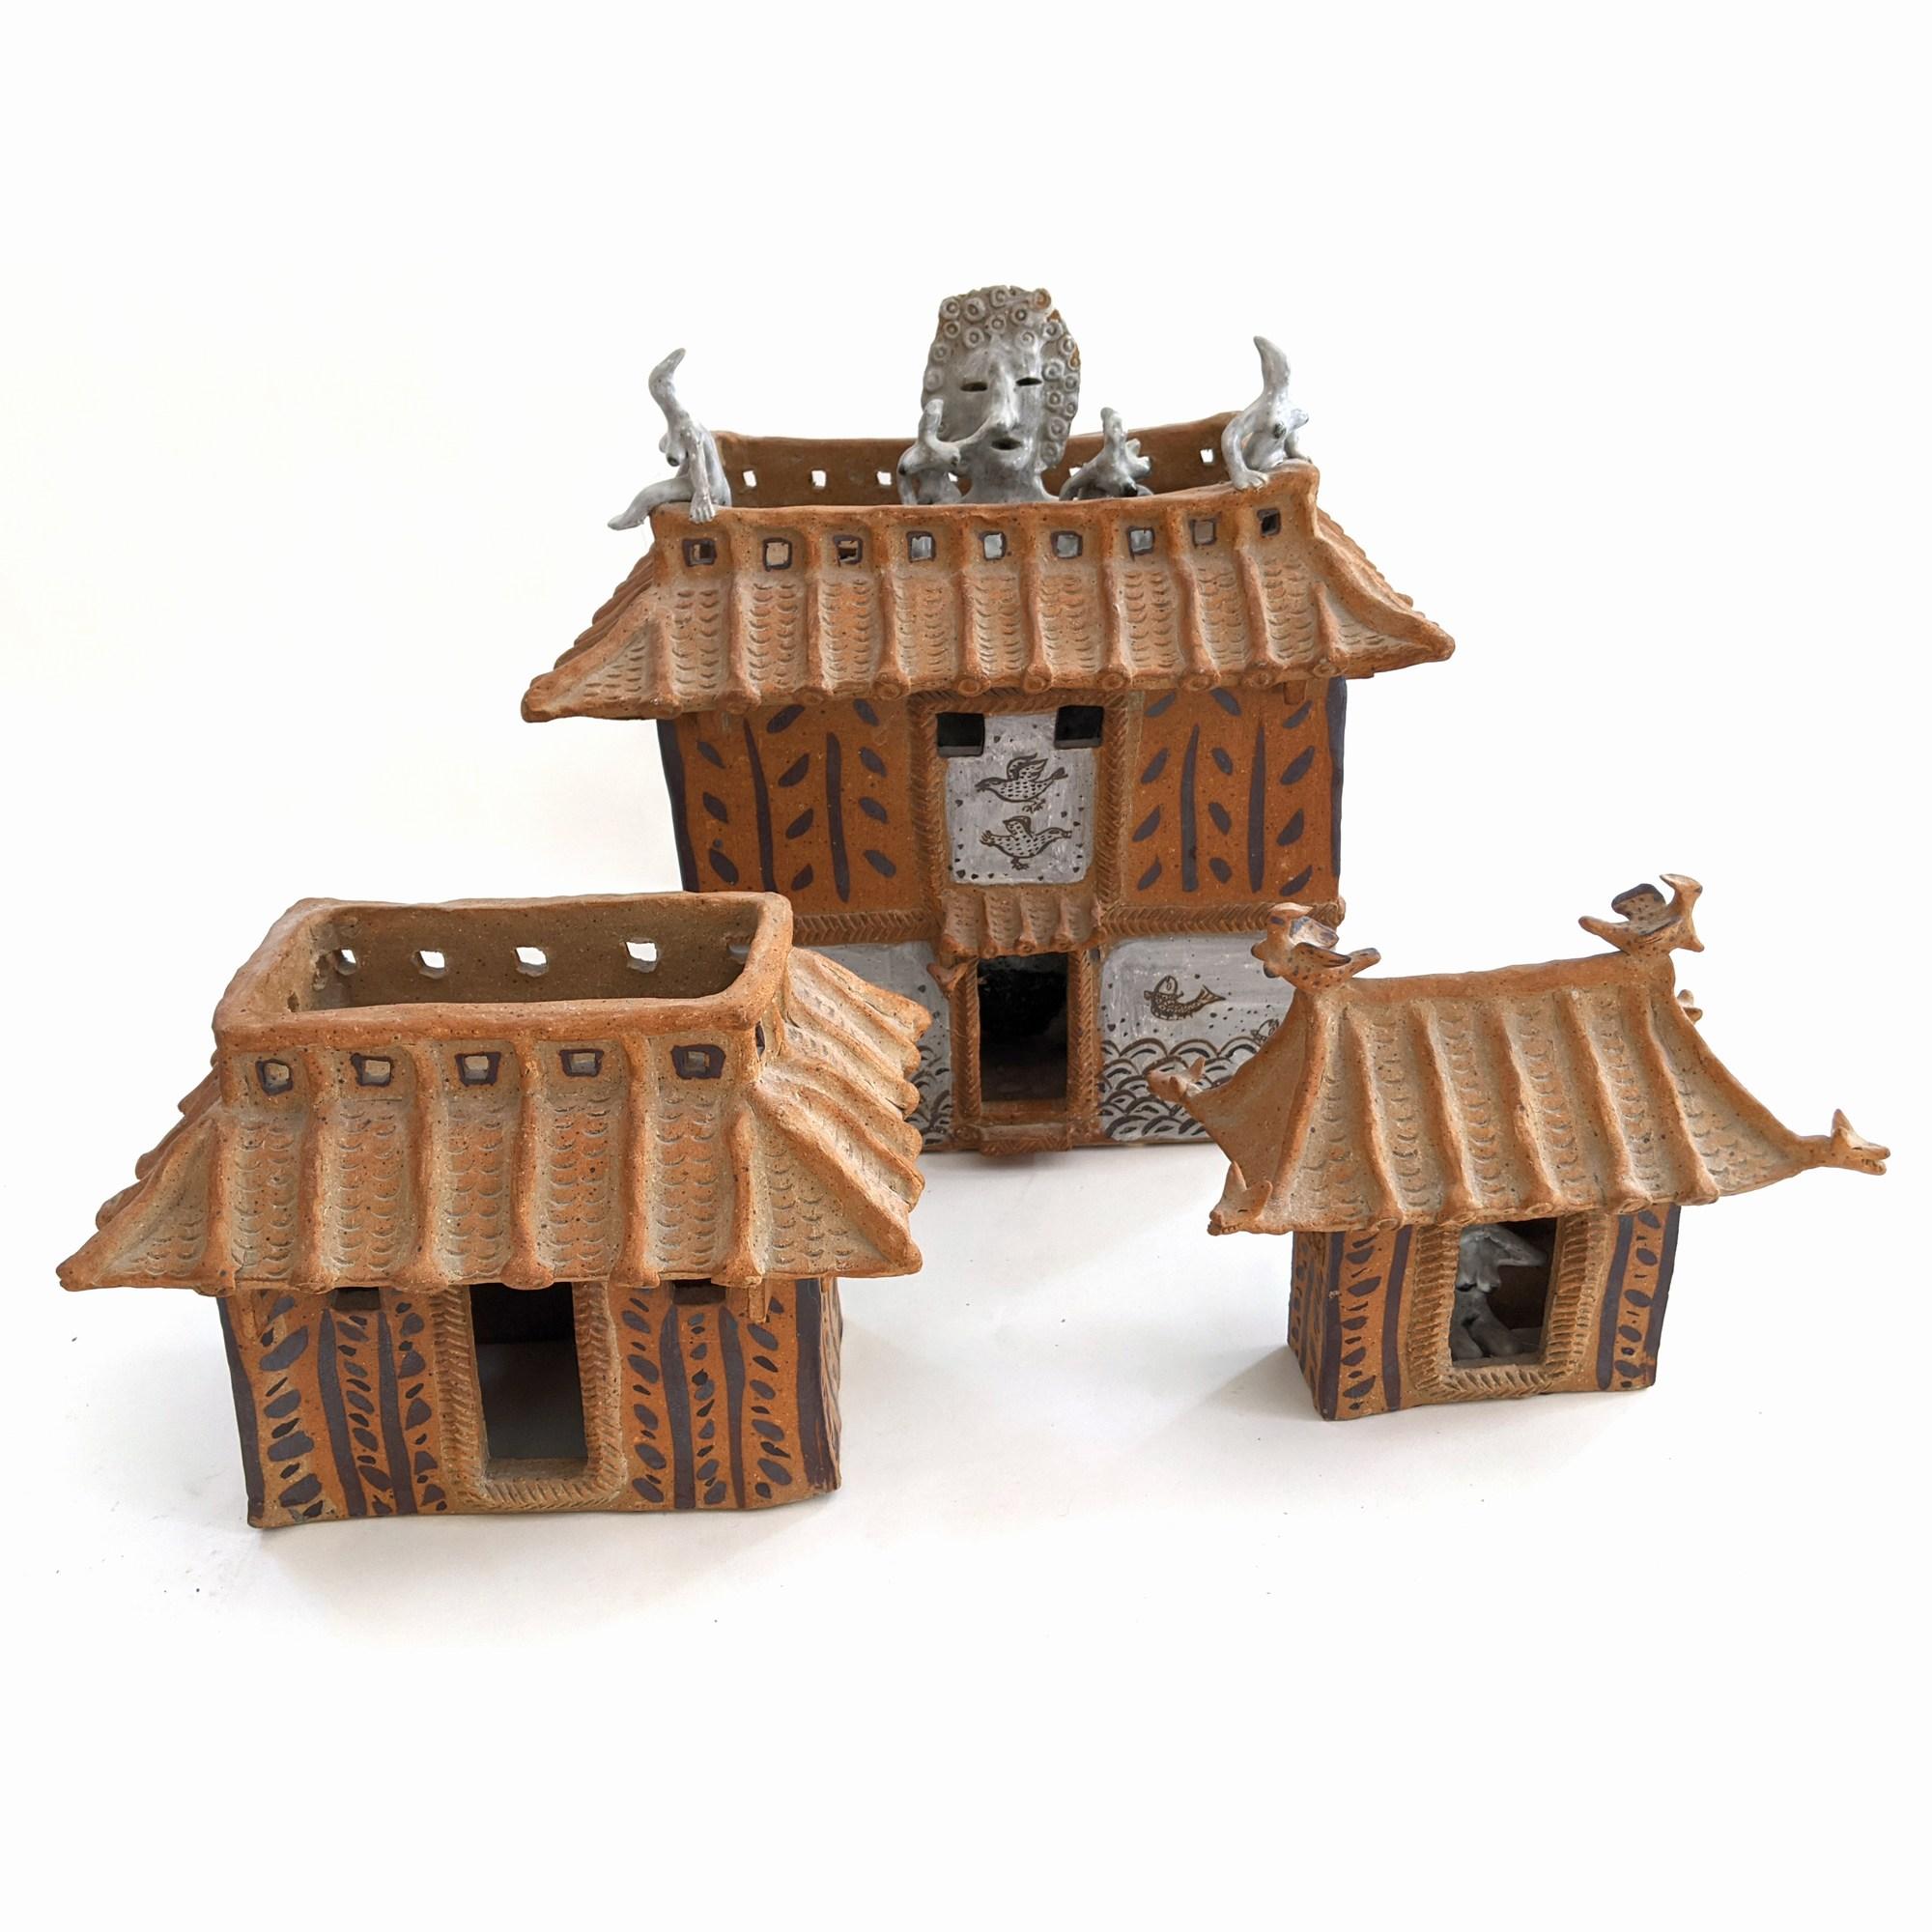 3 Tier House with Women inside - Modern Sculpture by Akio Takamori